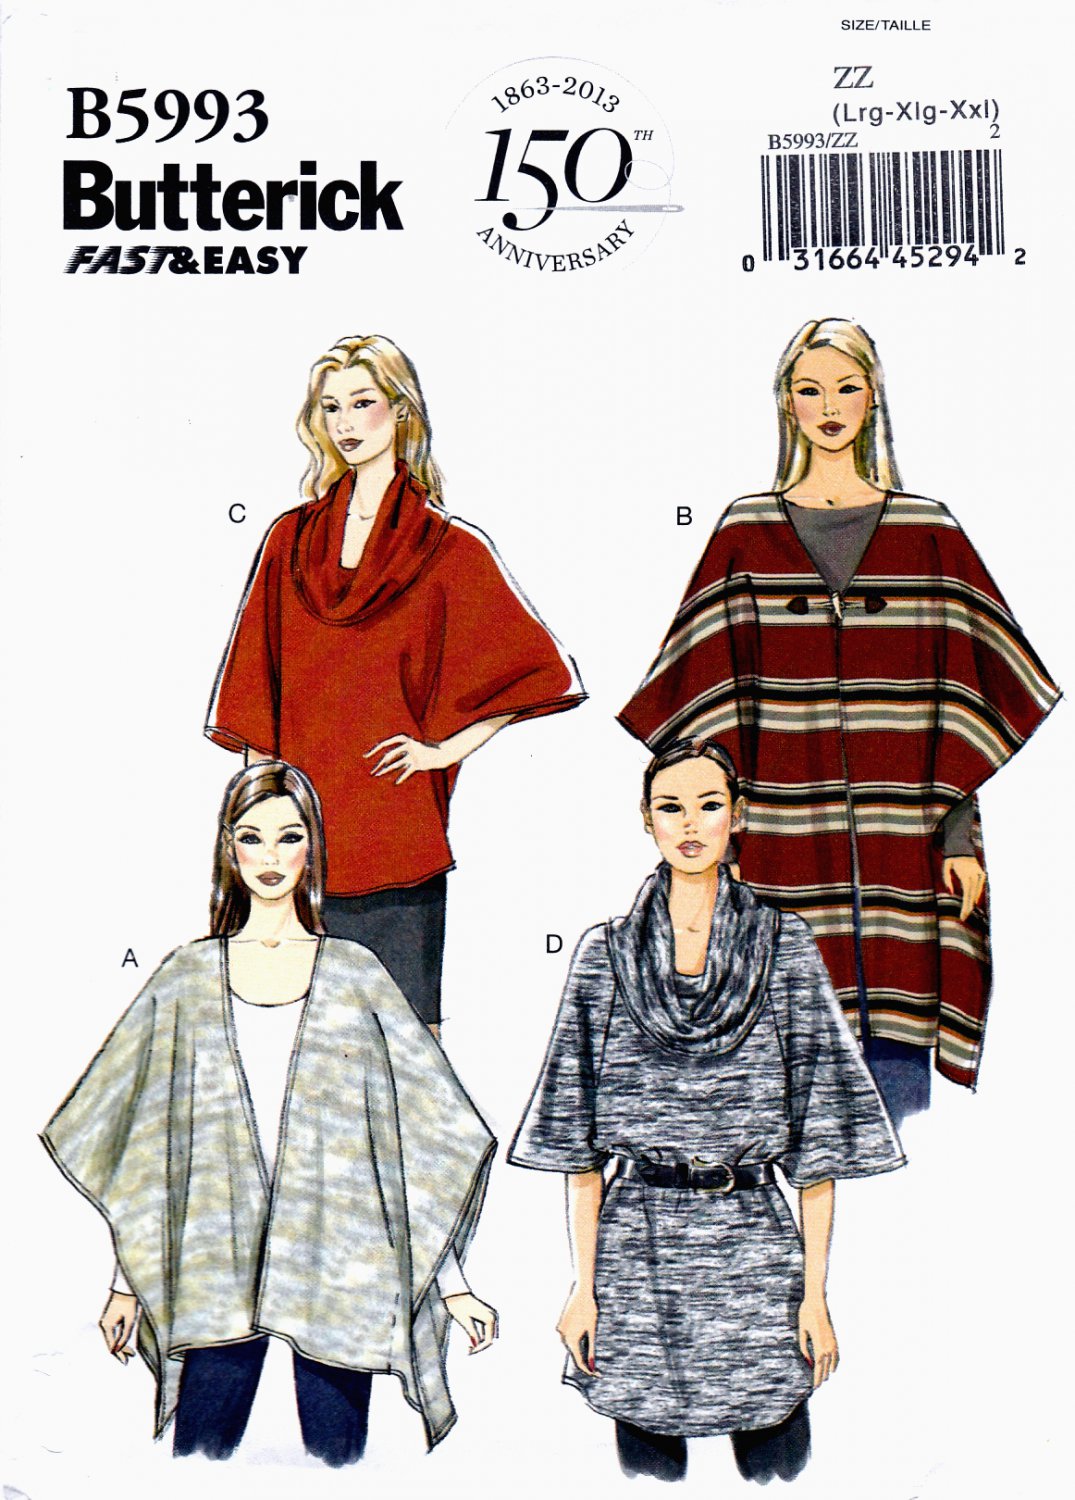 Butterick B5993 Misses Wraps Tops Tunics Sewing Pattern Sizes Lrg-Xlg-XXL